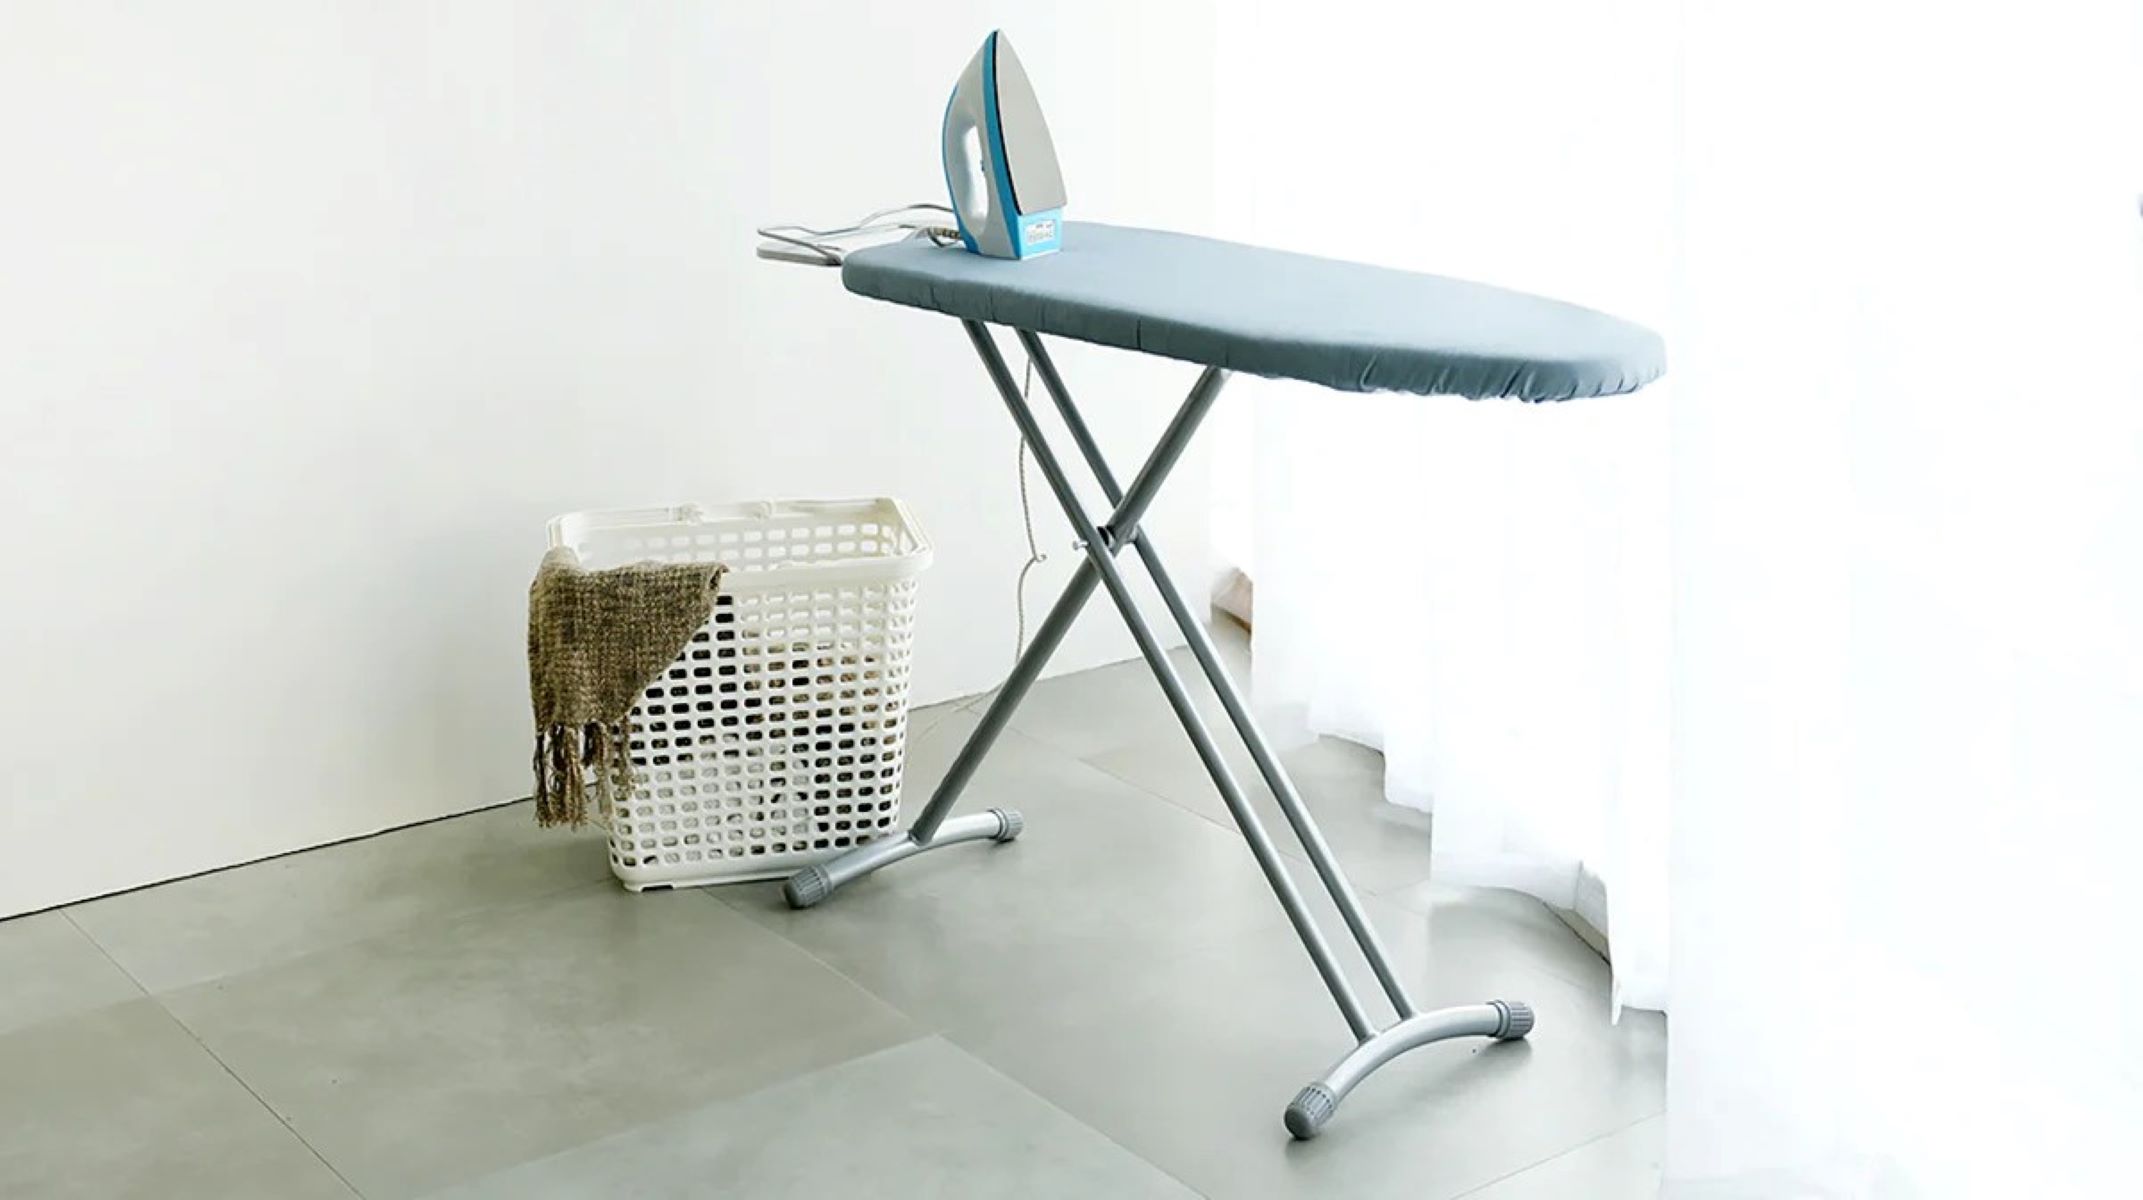 What To Look For In An Ironing Board